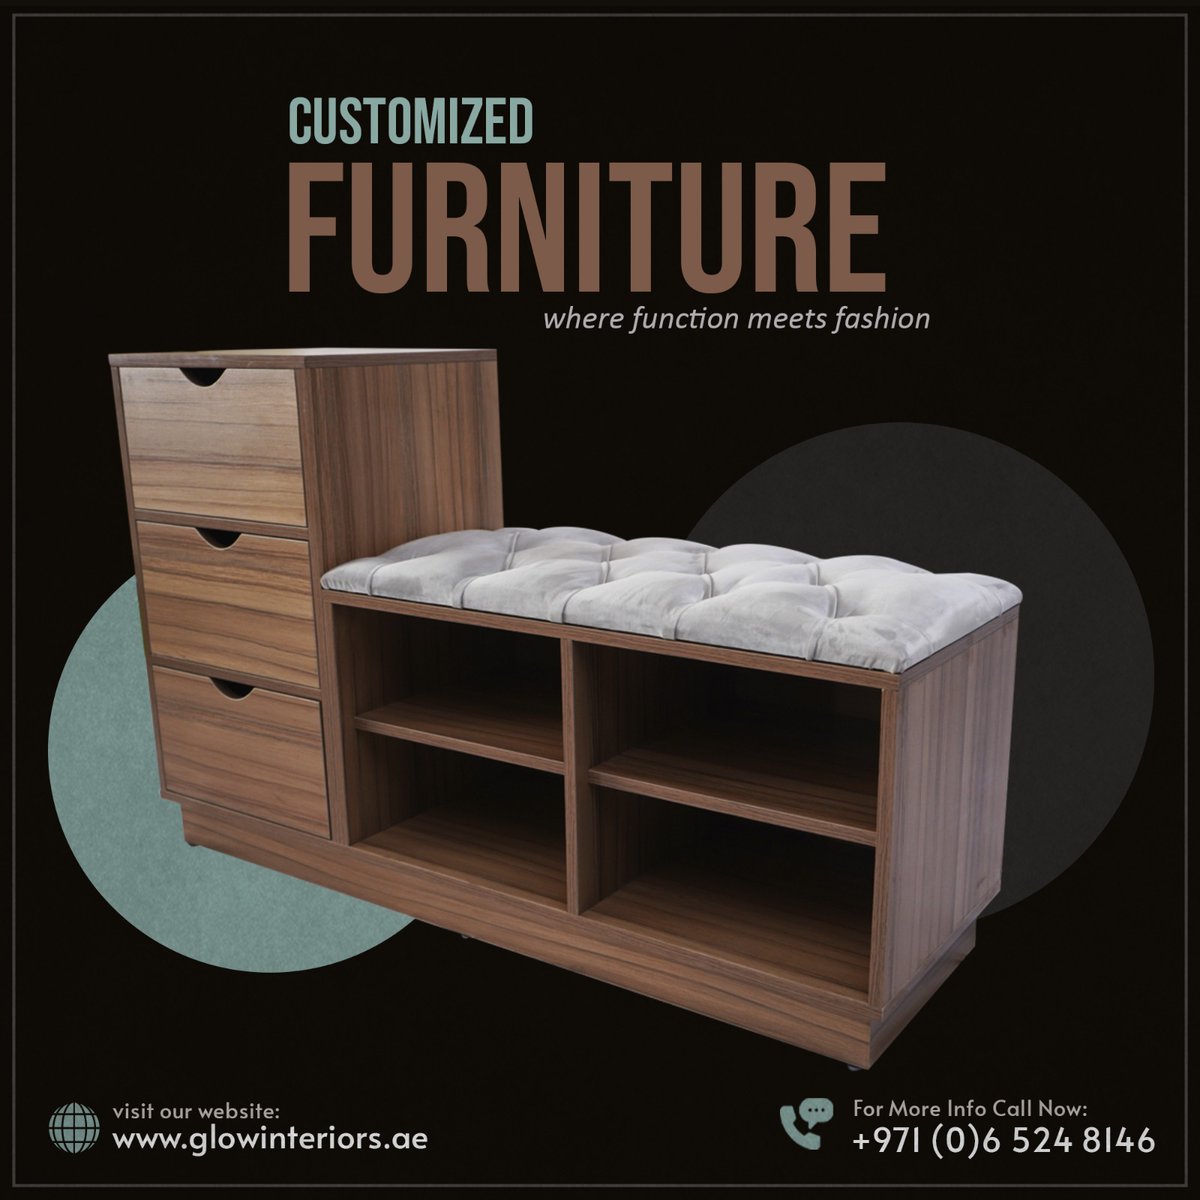 Customized Furniture, Custom Made Furniture

👉 visit us 🌐 glowinteriors.ae
📩 Email - info@glowinteriors.ae
☎️ Call: 0555279330
.
.
#customizedfurniture #furniture #made #moderndesign #customizeddesign #interiordesign #design #bedroom #officefurniture #officespace #uae